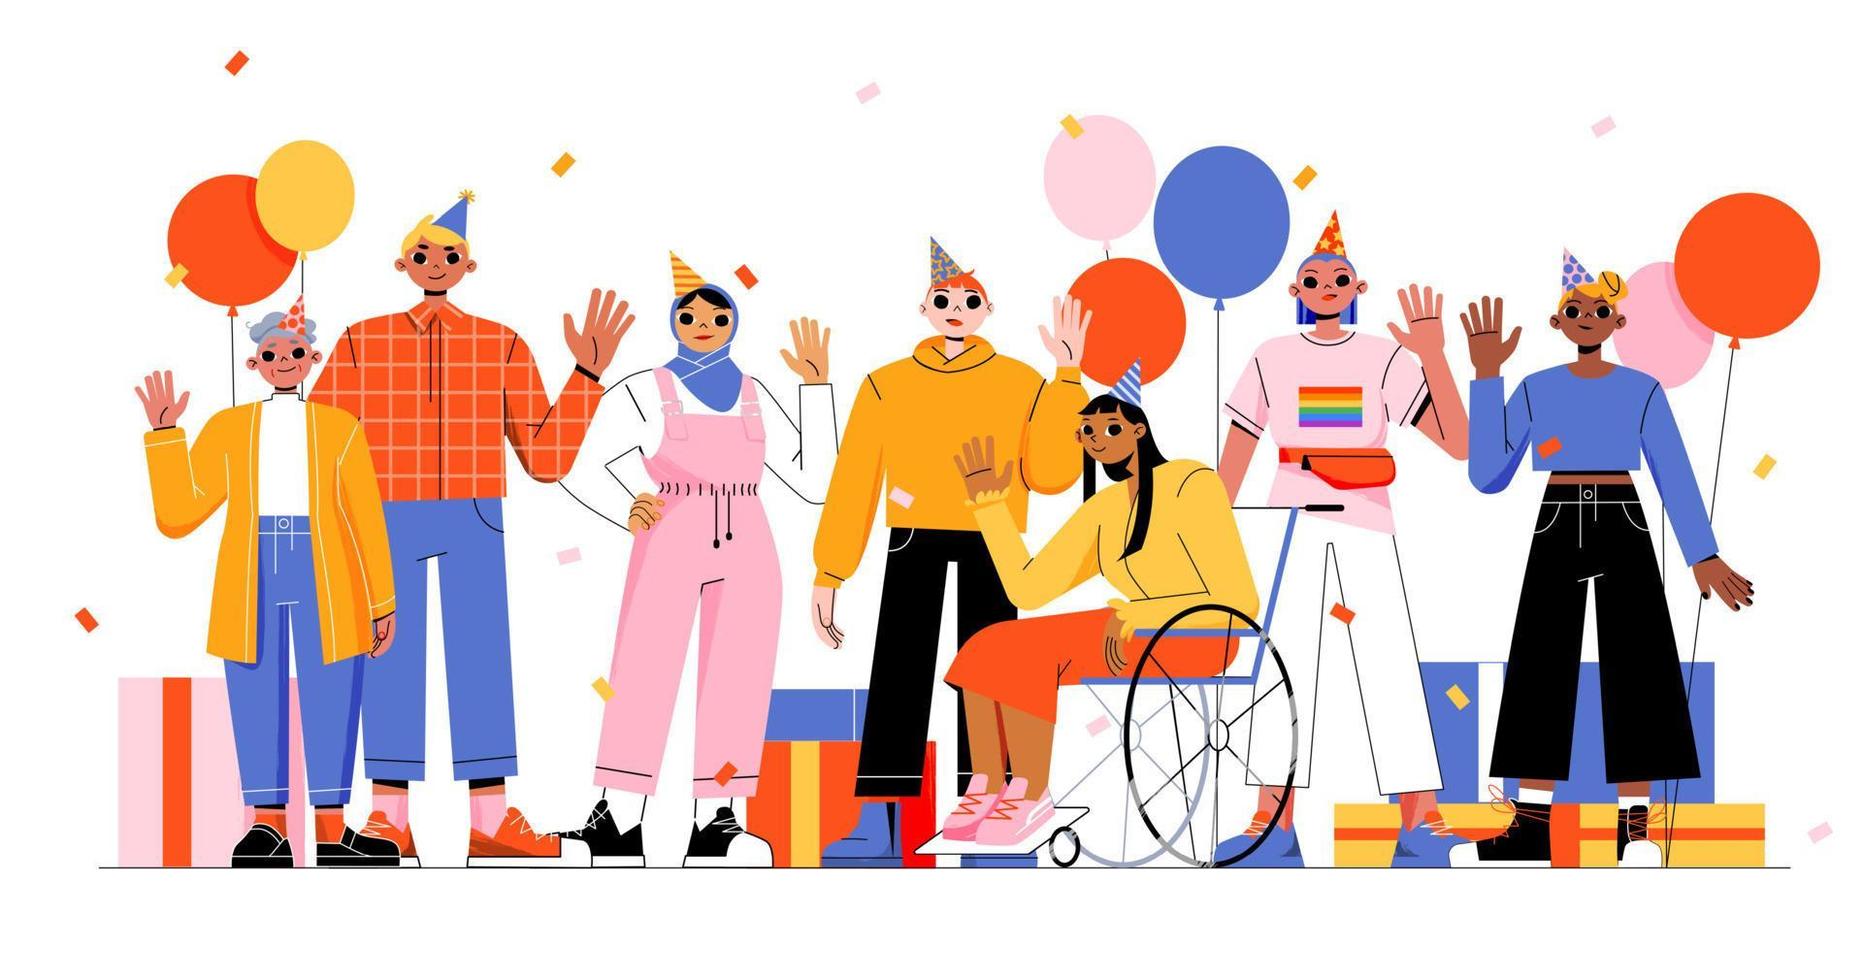 Diverse people waving hands on birthday party vector